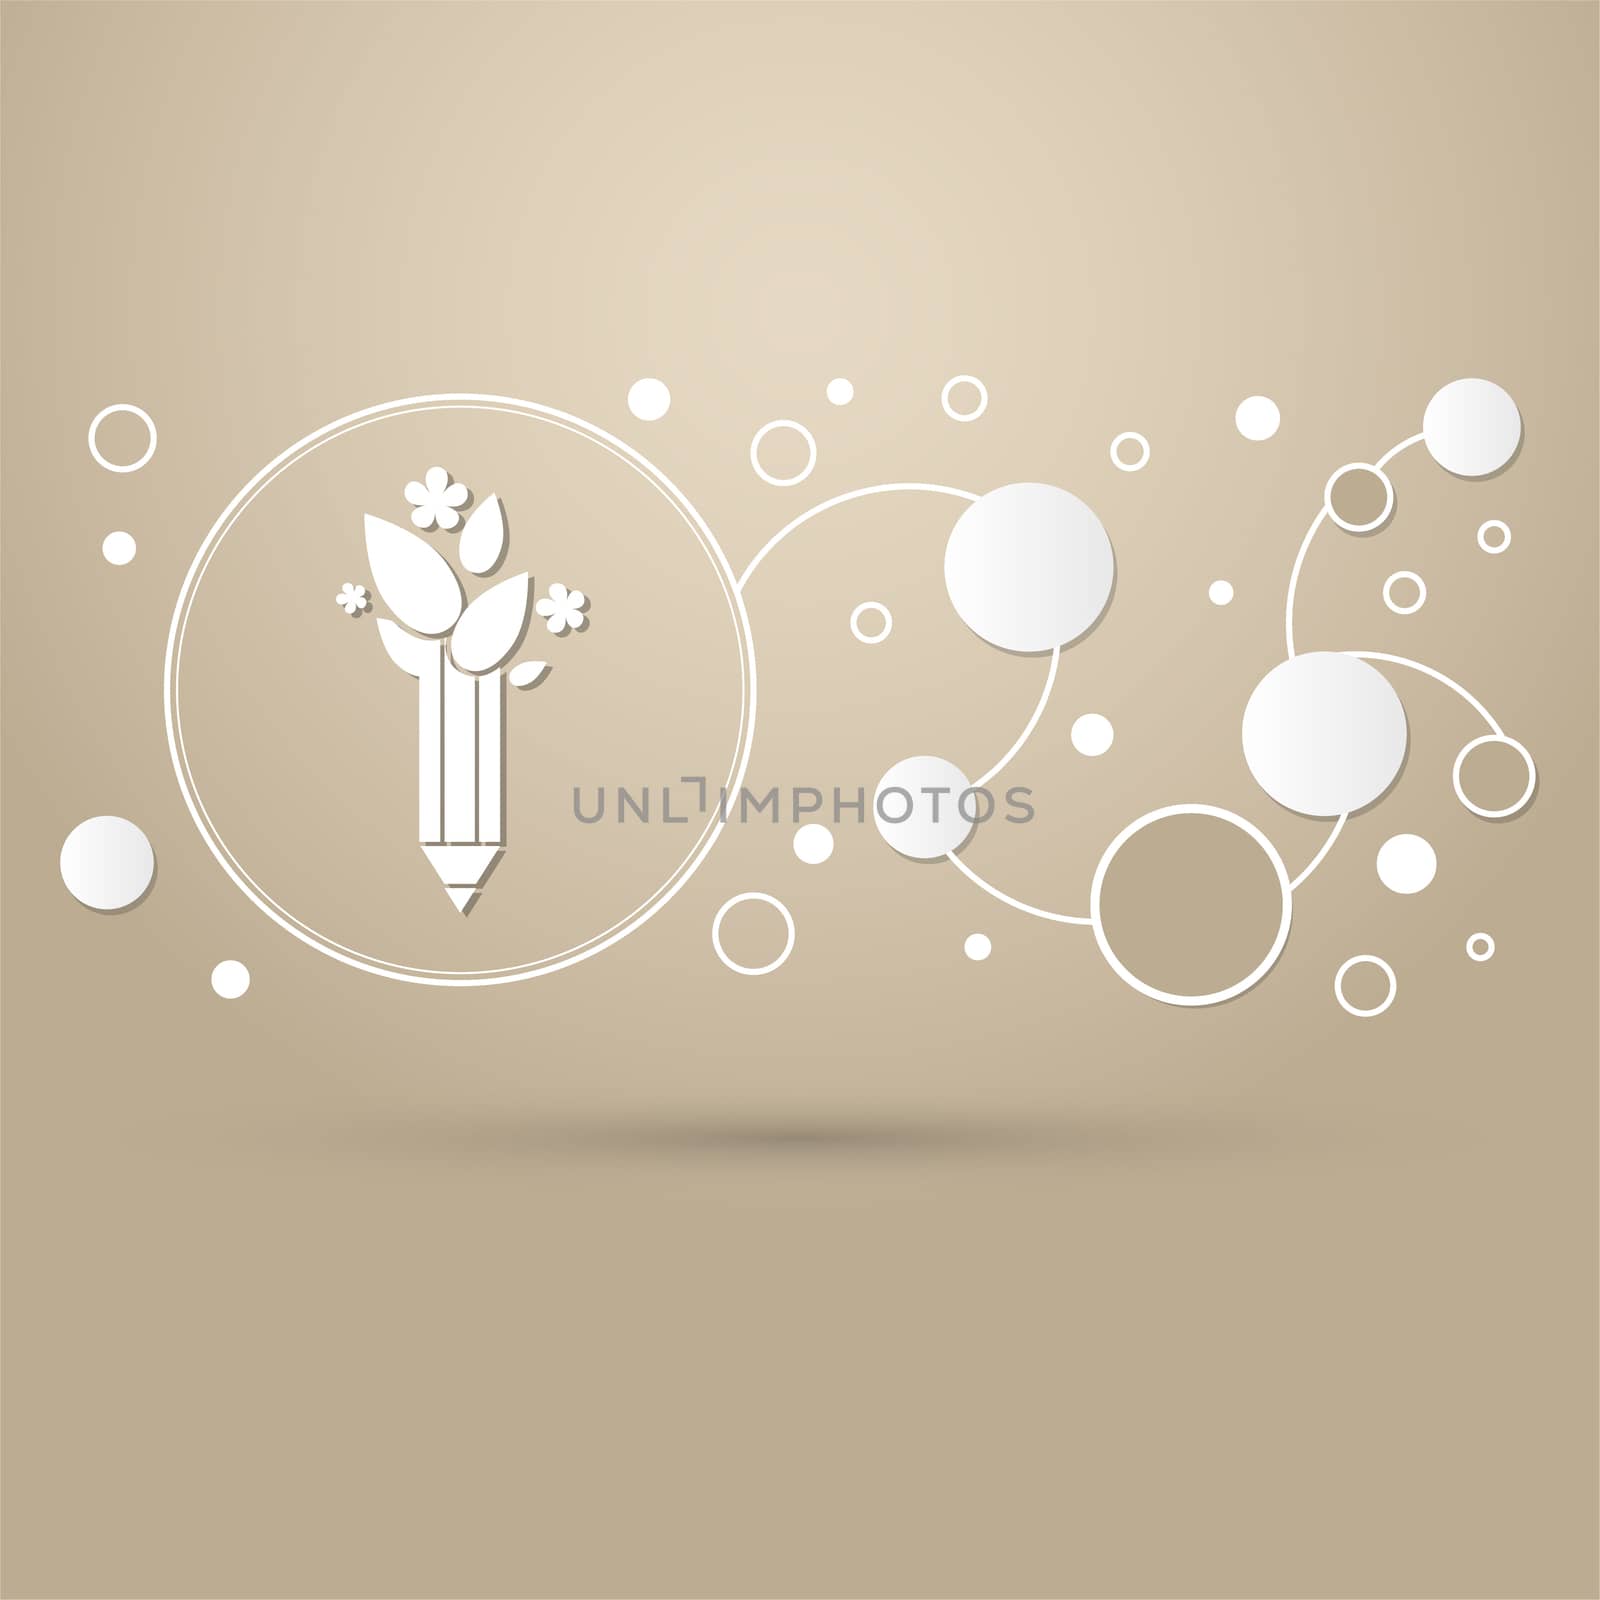 Ecology pencil, eco pen icon on a brown background with elegant style and modern design infographic.  by Adamchuk